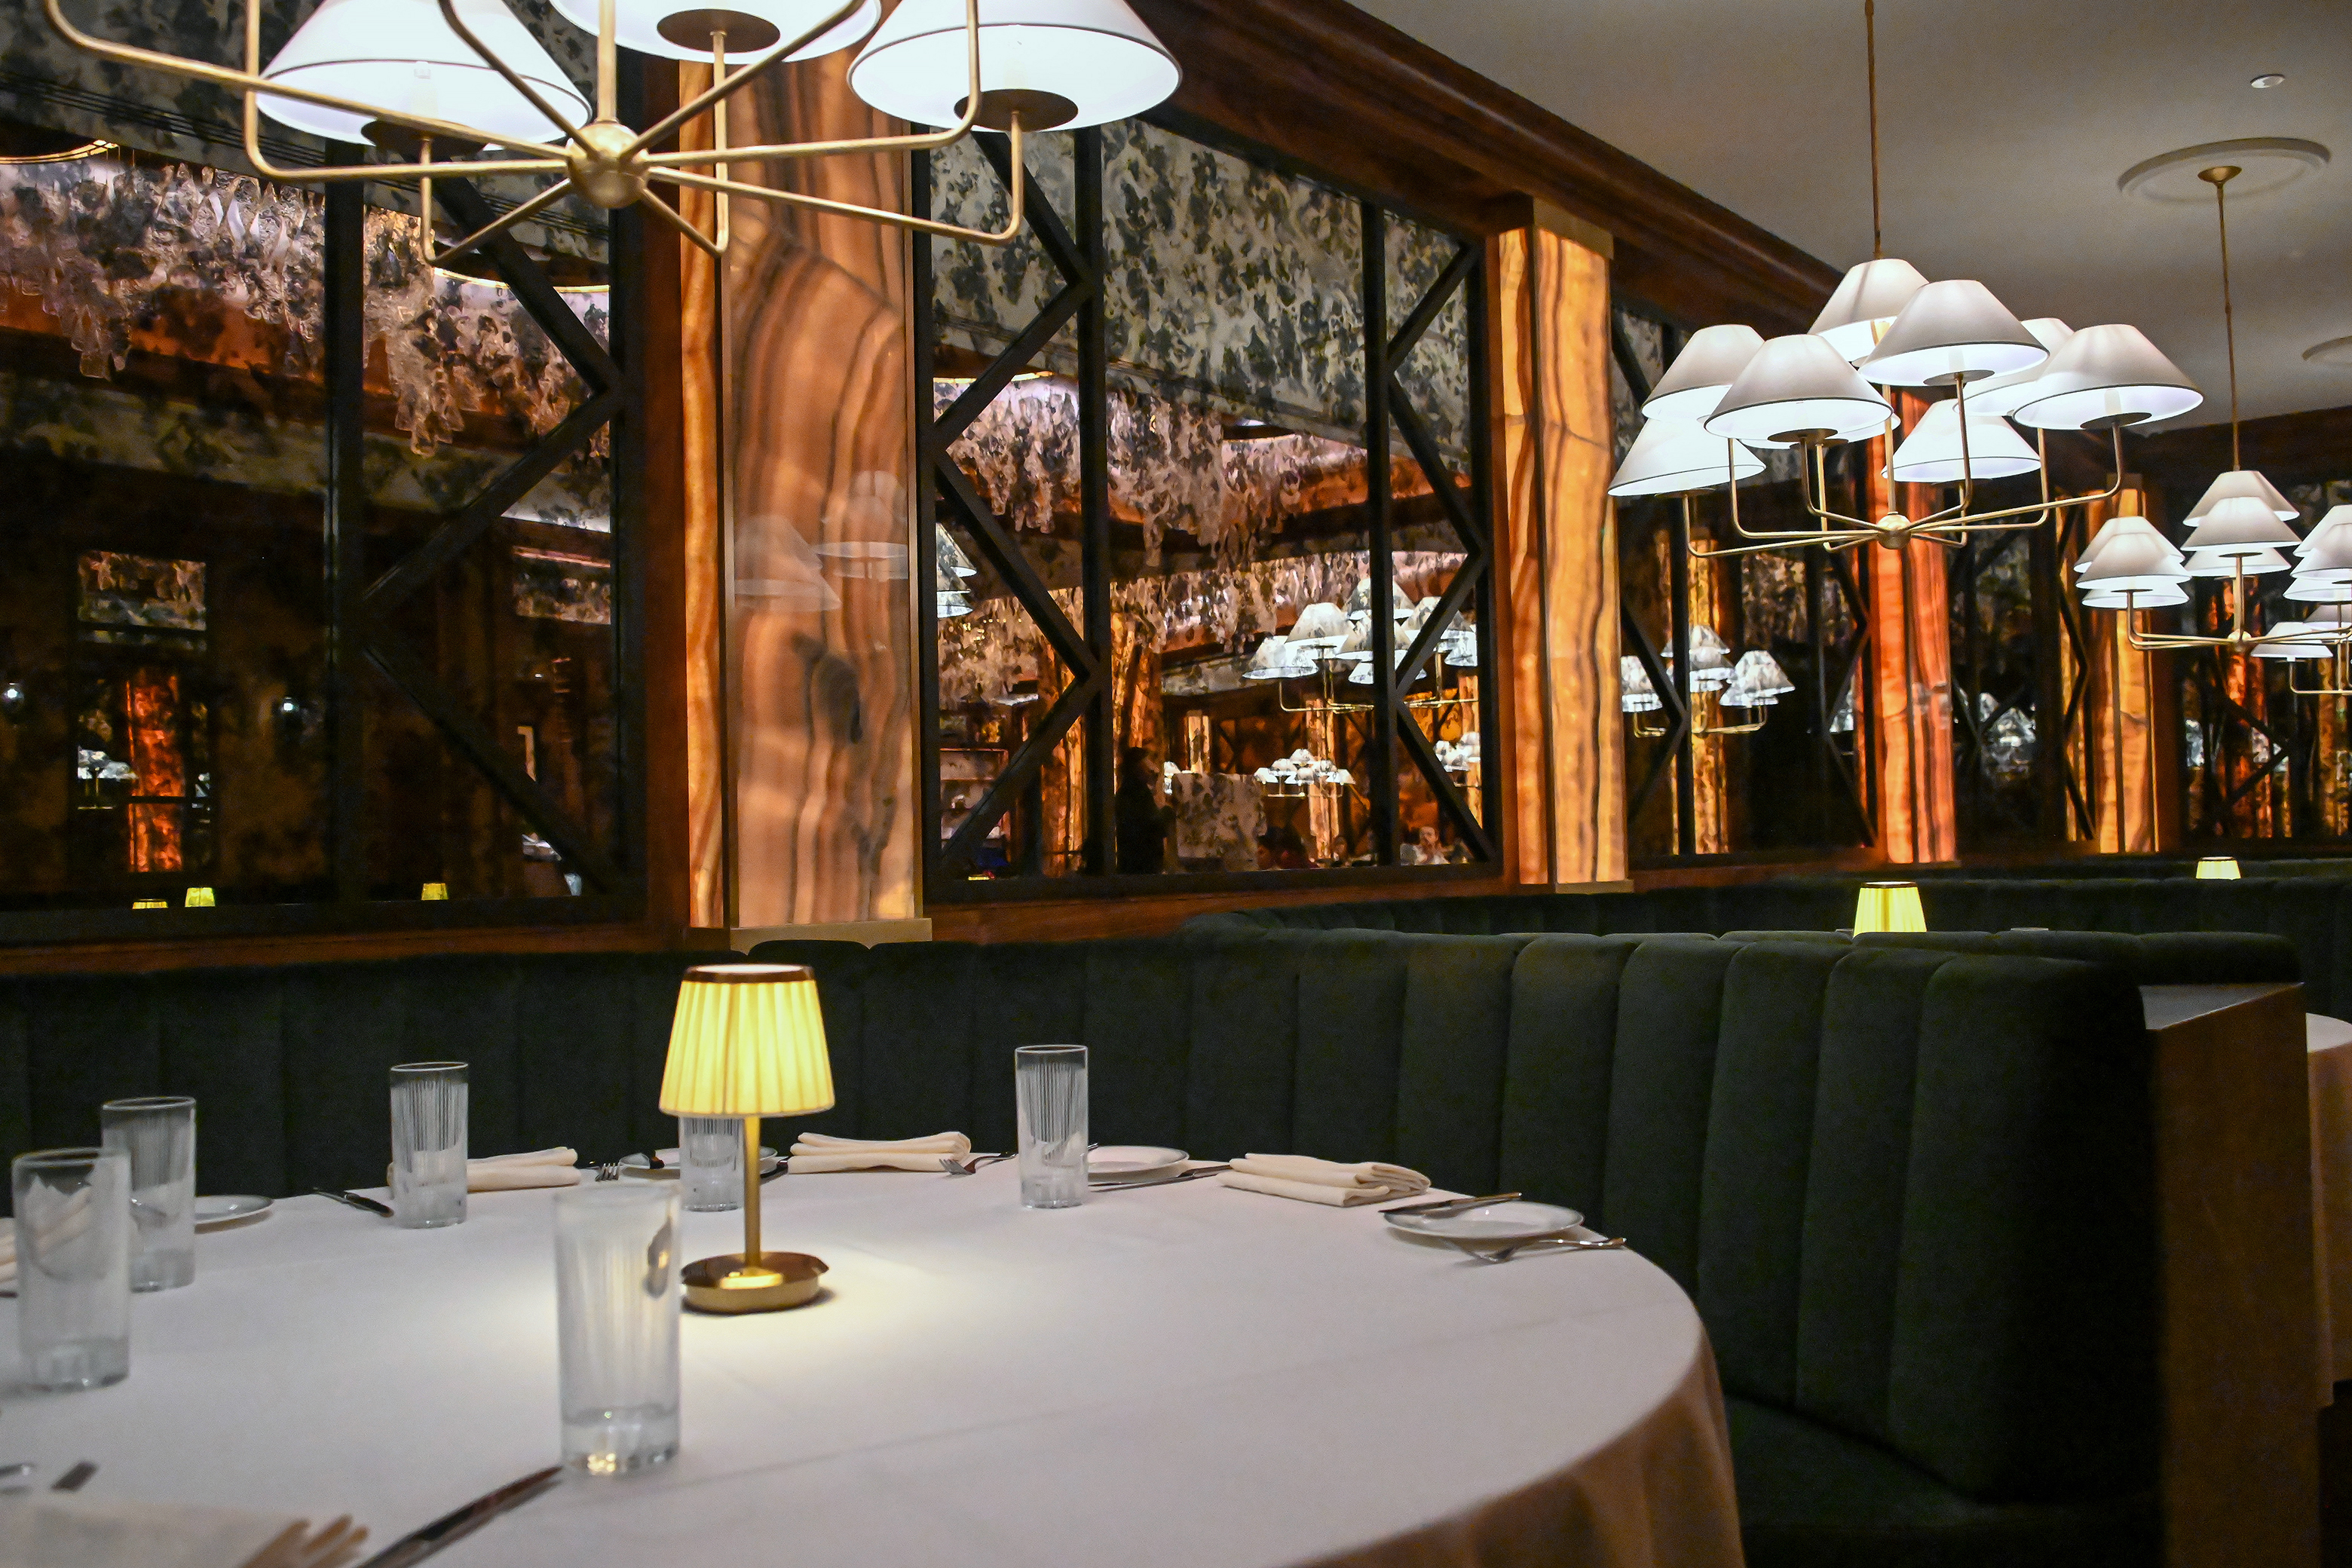 Atlas Restaurant Group new restaurant called The Ruxton in the former Fleming's Steakhouse space in Harbor East. The new spot, described as a "classic steakhouse," with many large group seating areas. (Kevin Richardson/Staff)